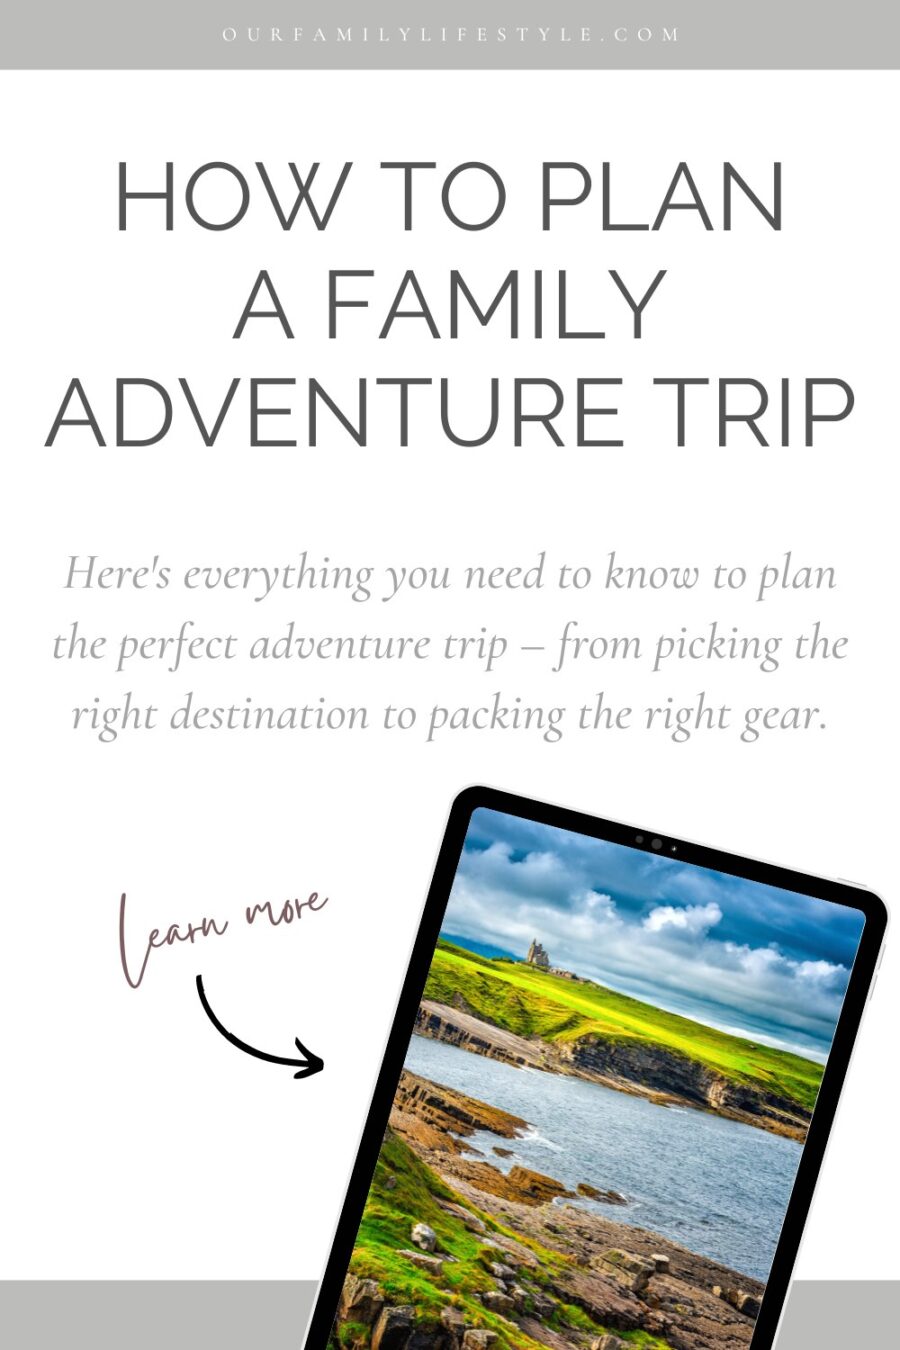 How to Plan a Family Adventure Trip: The Complete Guide